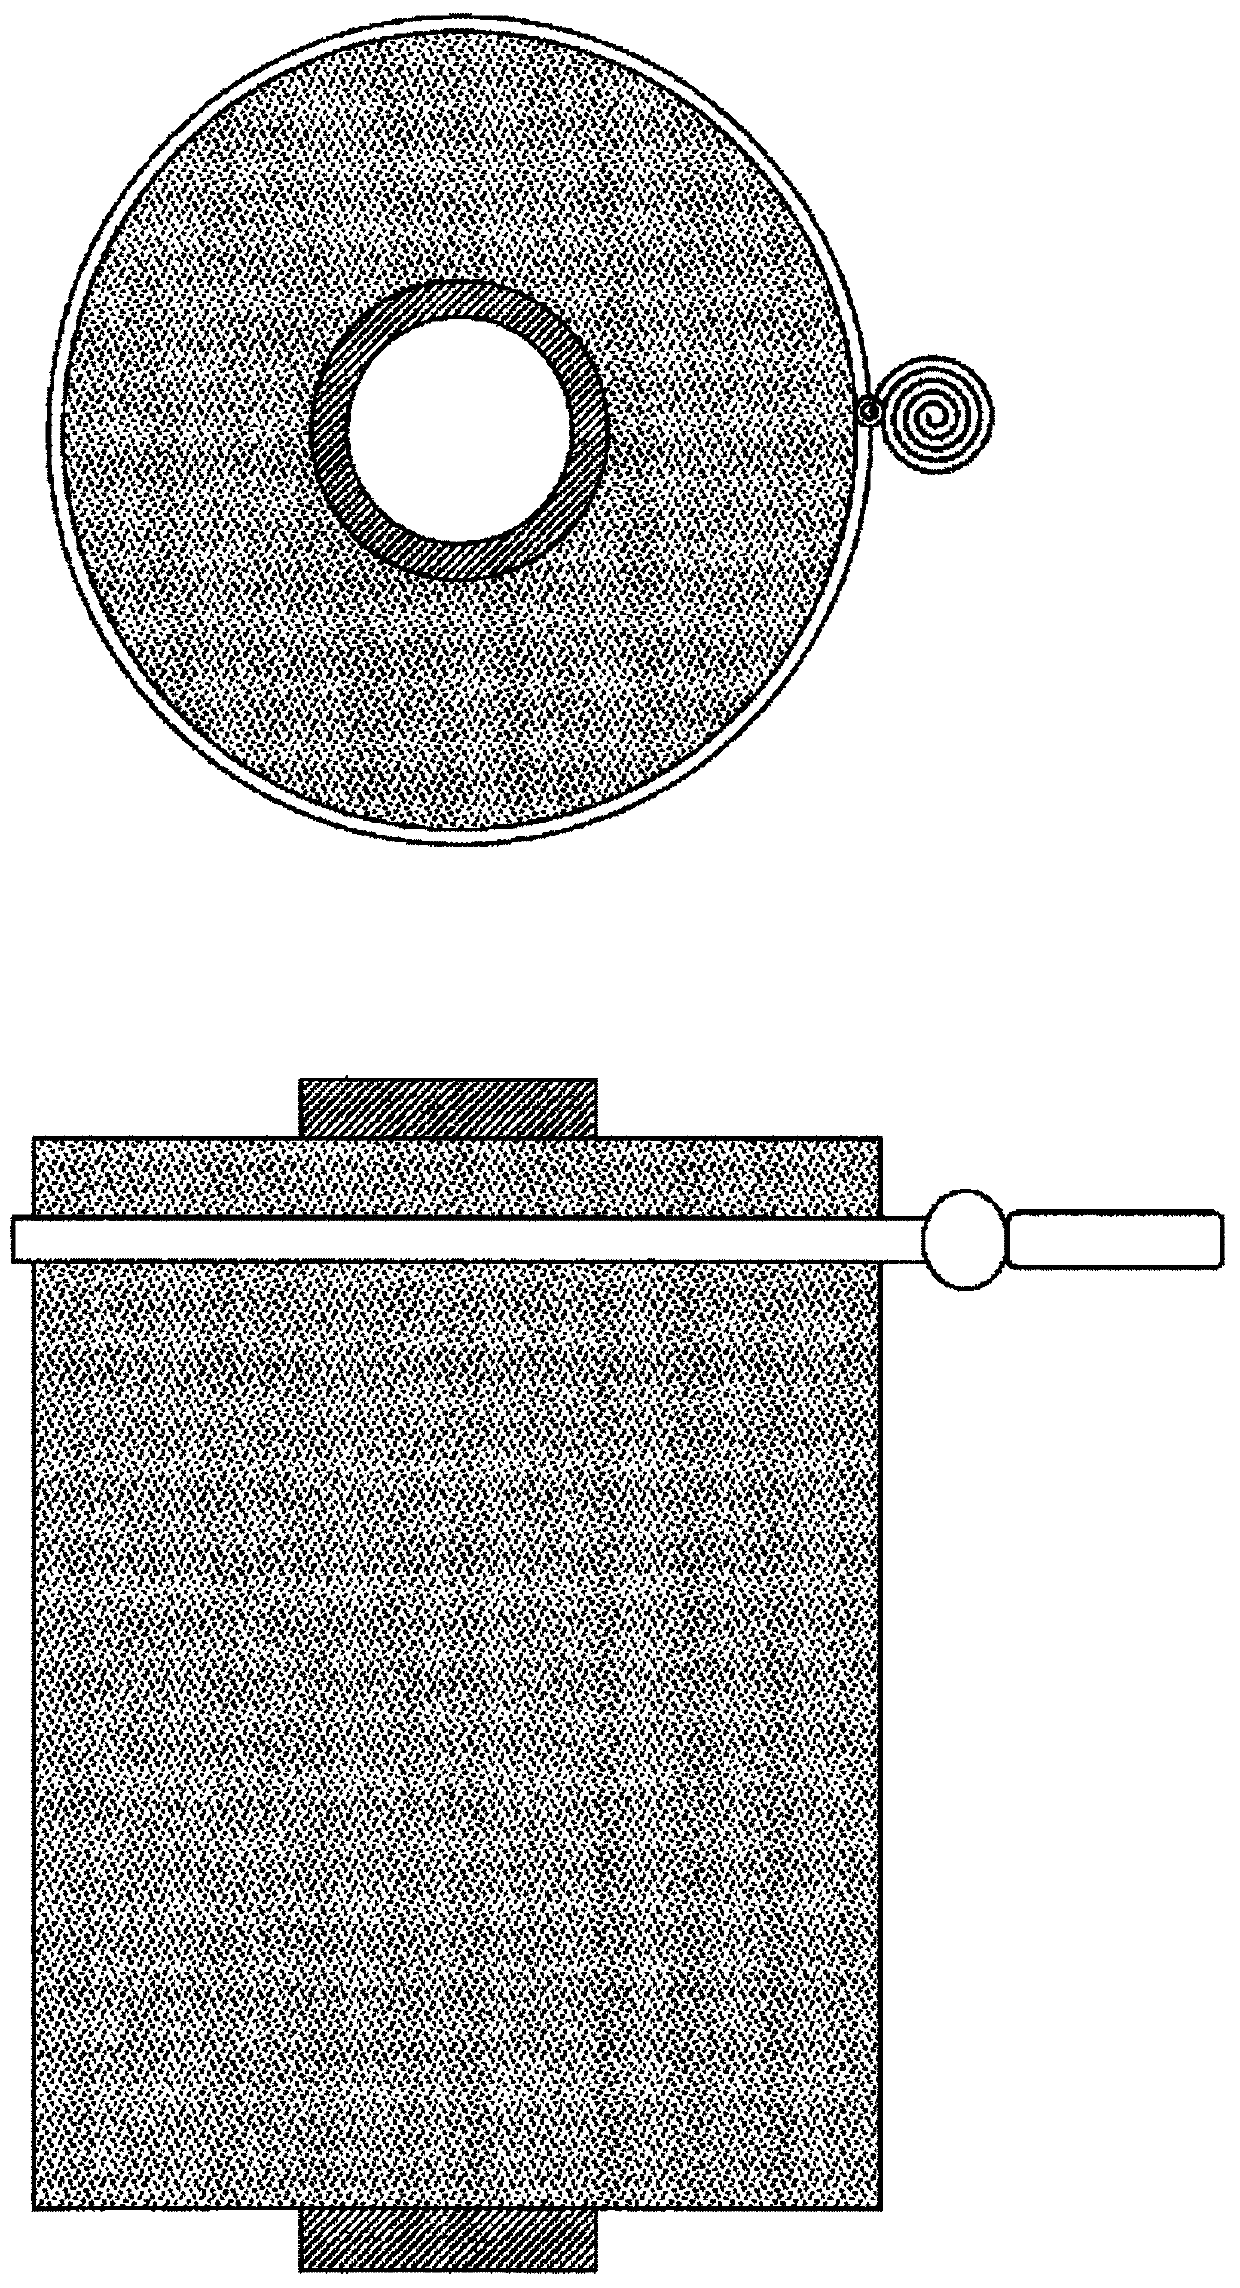 Carpet with self-twisted loop pile and methods for making the same